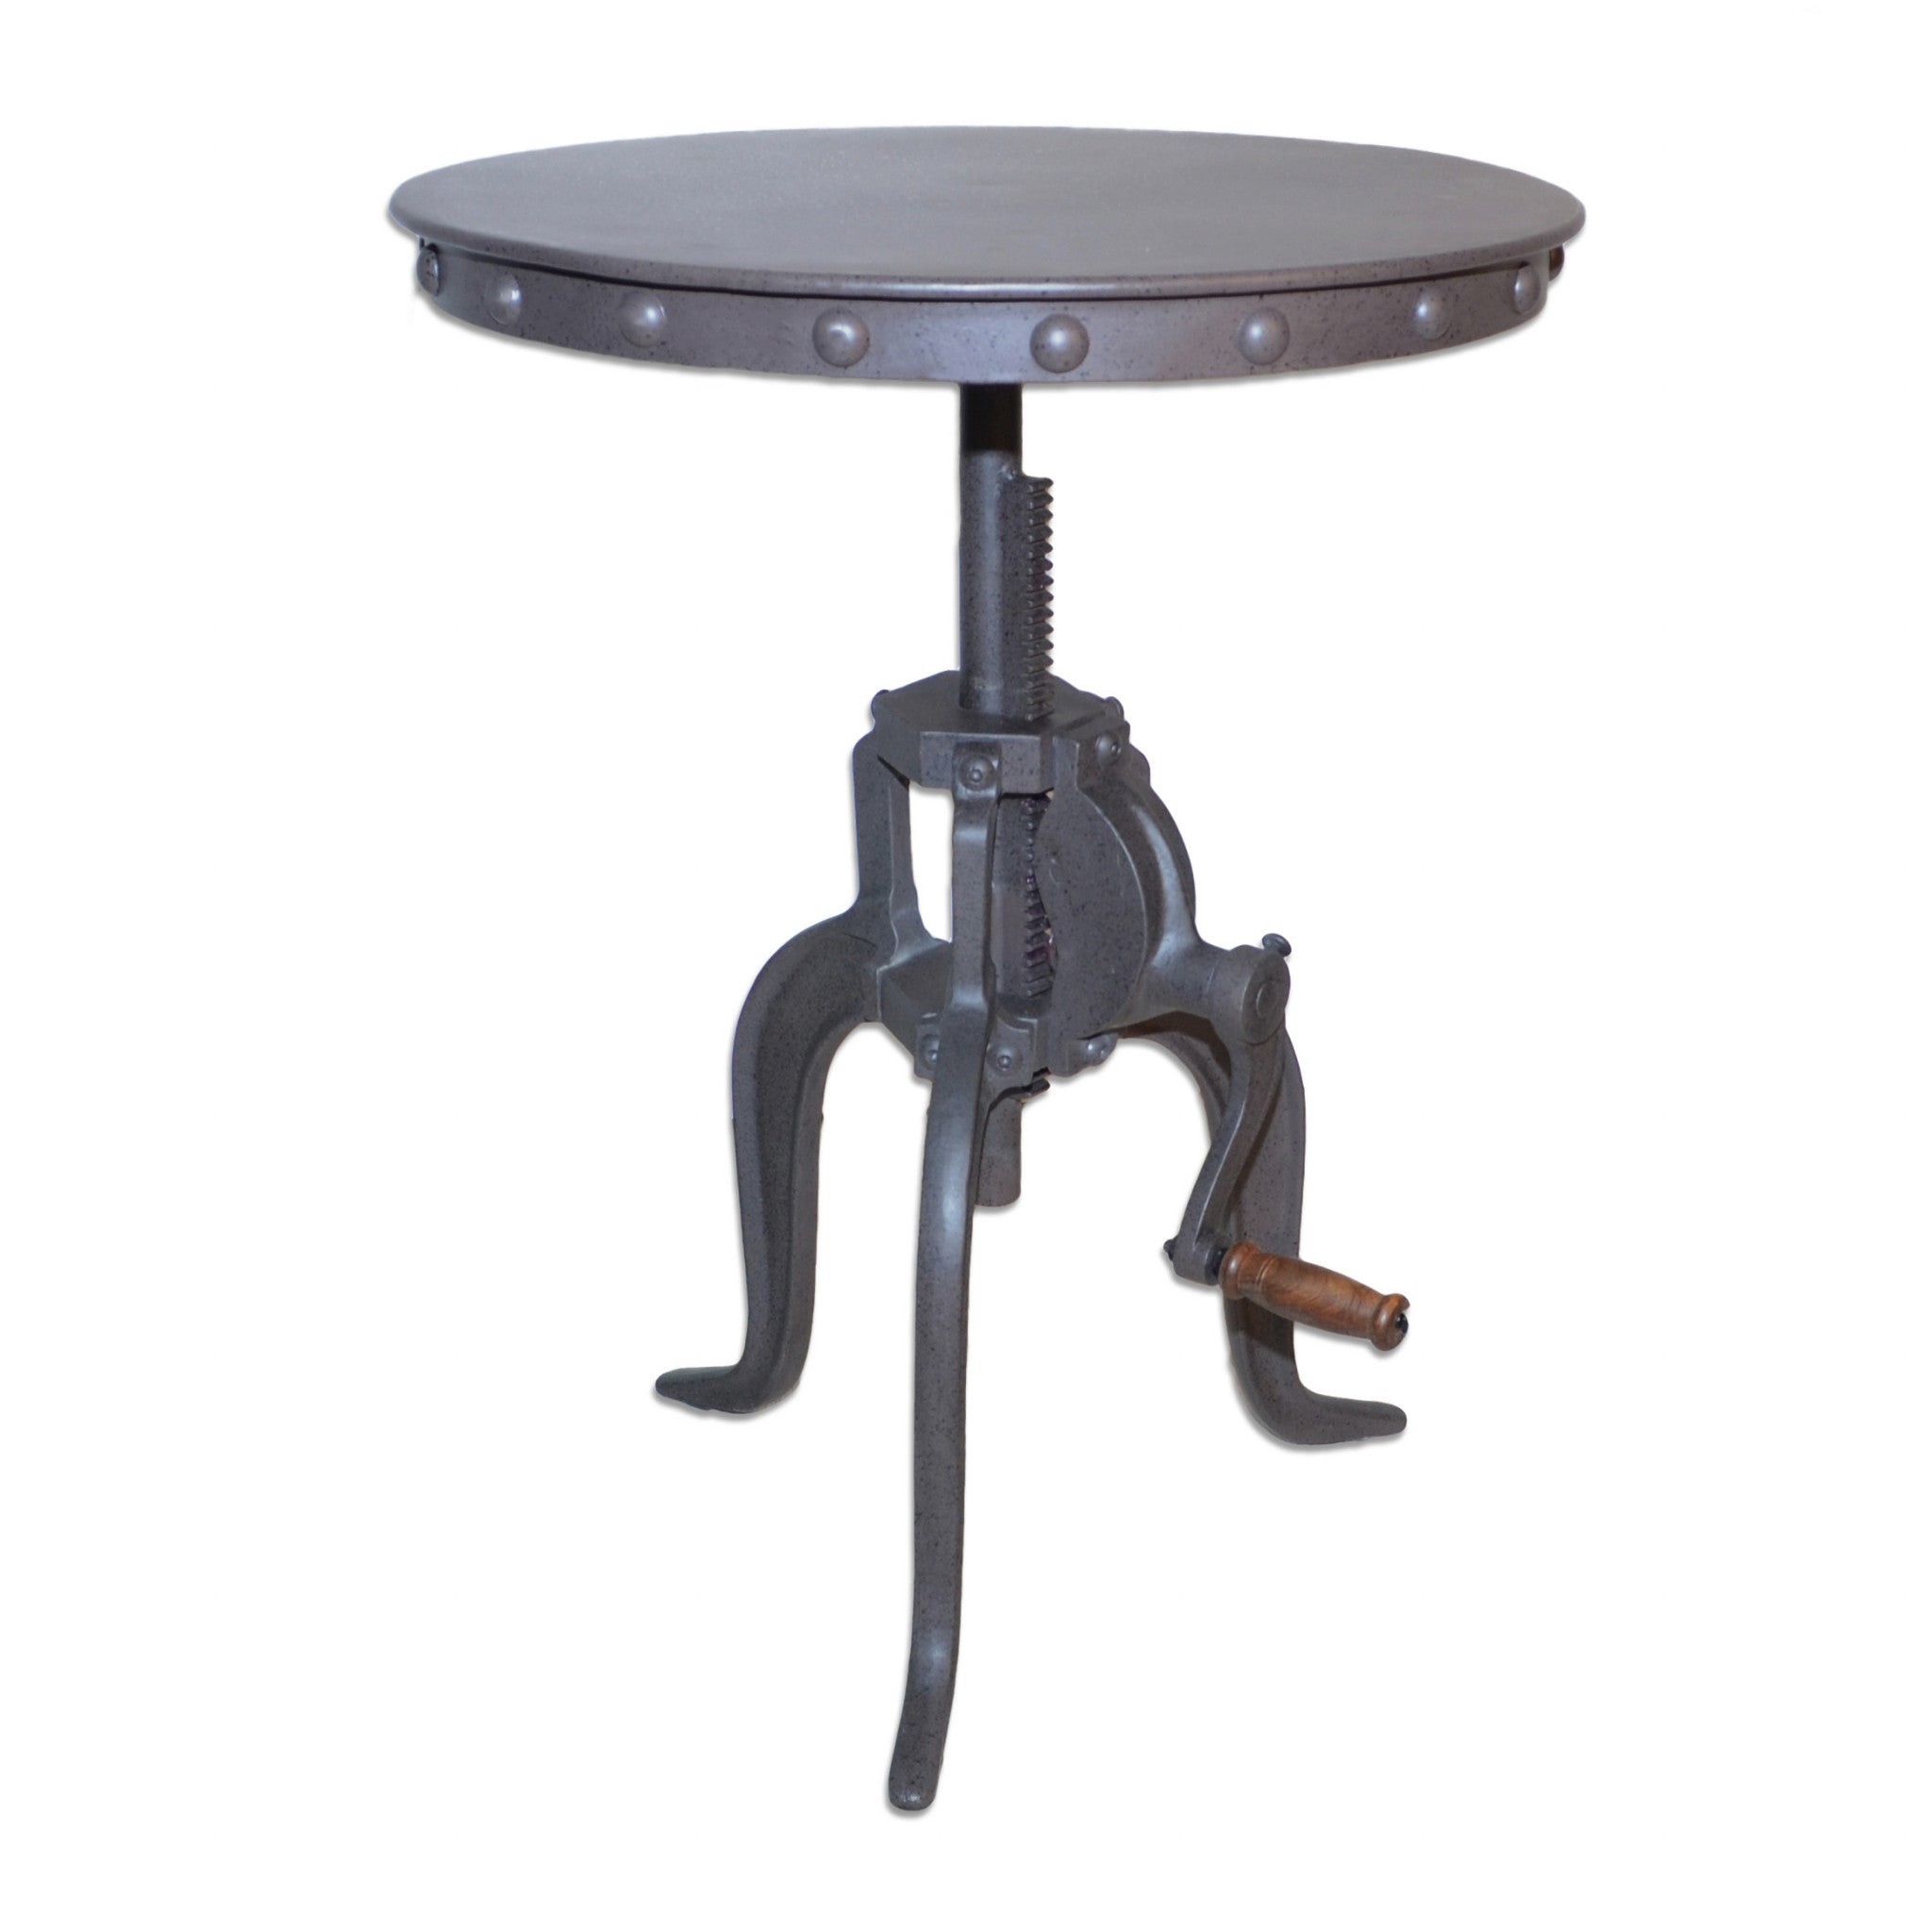 19" Inndustrial And Industrial Metal Round End Table